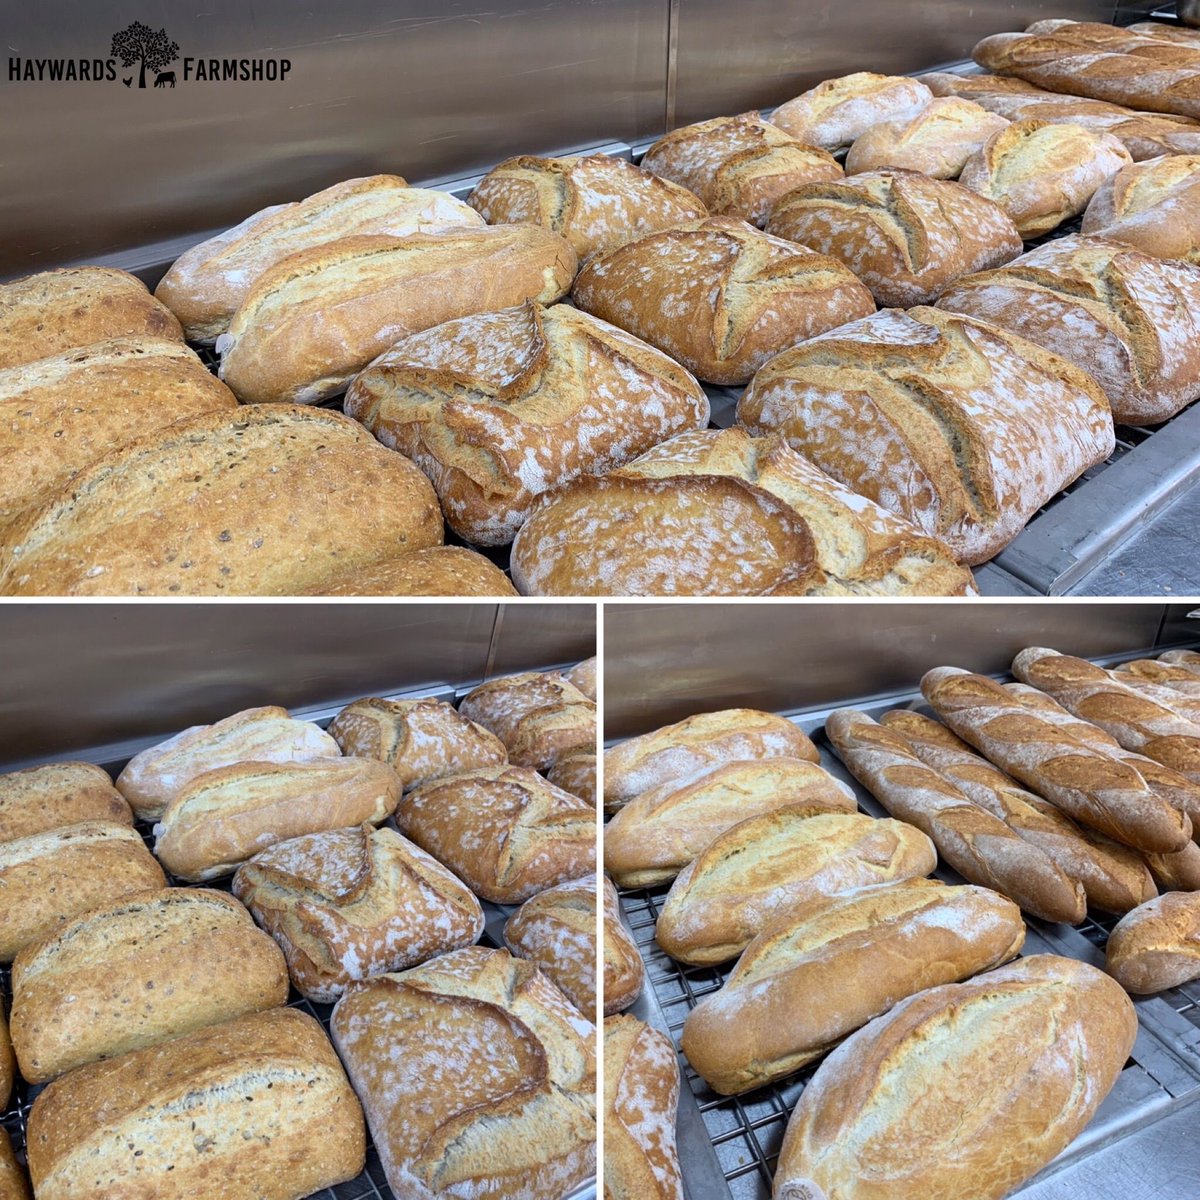 🍞✨ Experience the warmth and aroma of our freshly baked bread, available every day at the Farmshop. Whether you crave a crusty baguette or a fluffy sourdough, we've got your bread needs covered! #FreshBread #Sourdough #Baguette #FarmshopFinds #ShopLocal #Tonbridge #Haywards1990